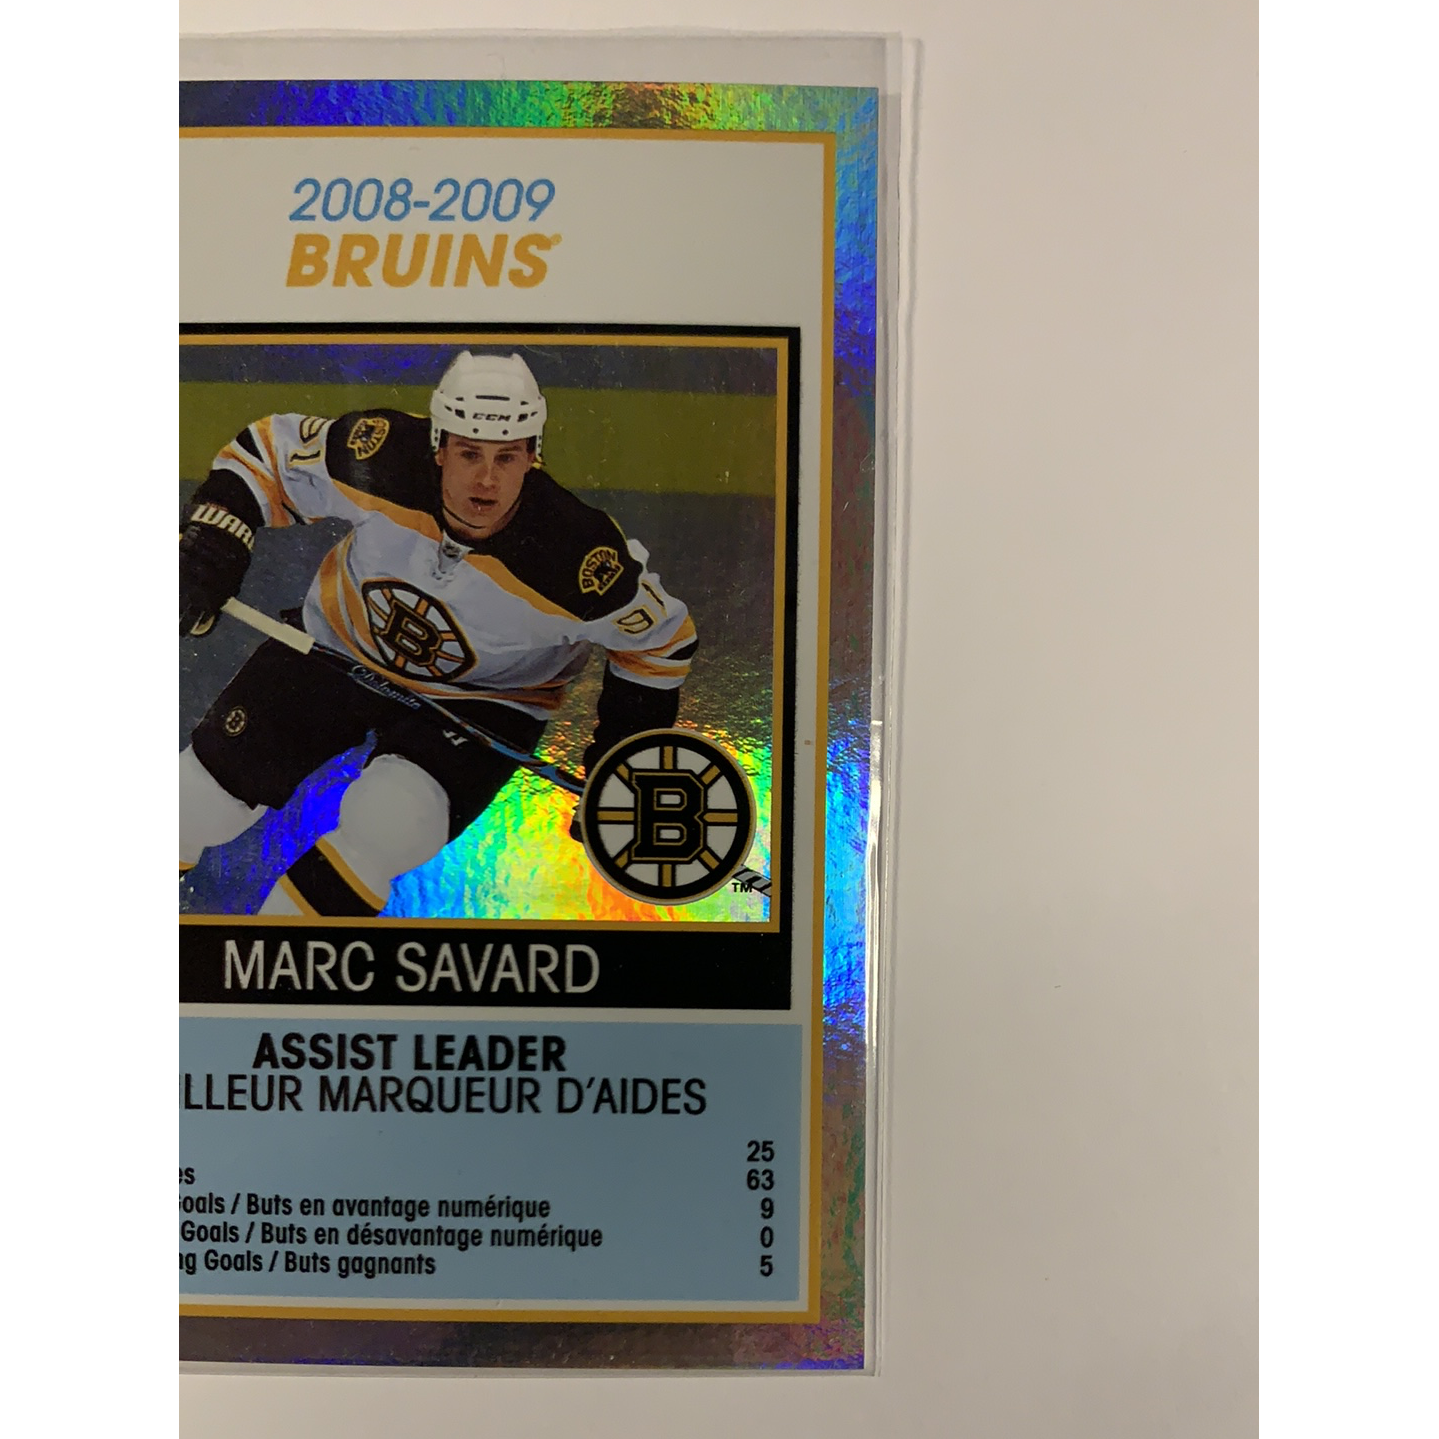  2008-09 O-Pee-Chee Marc Savard Assist Leader  Local Legends Cards & Collectibles